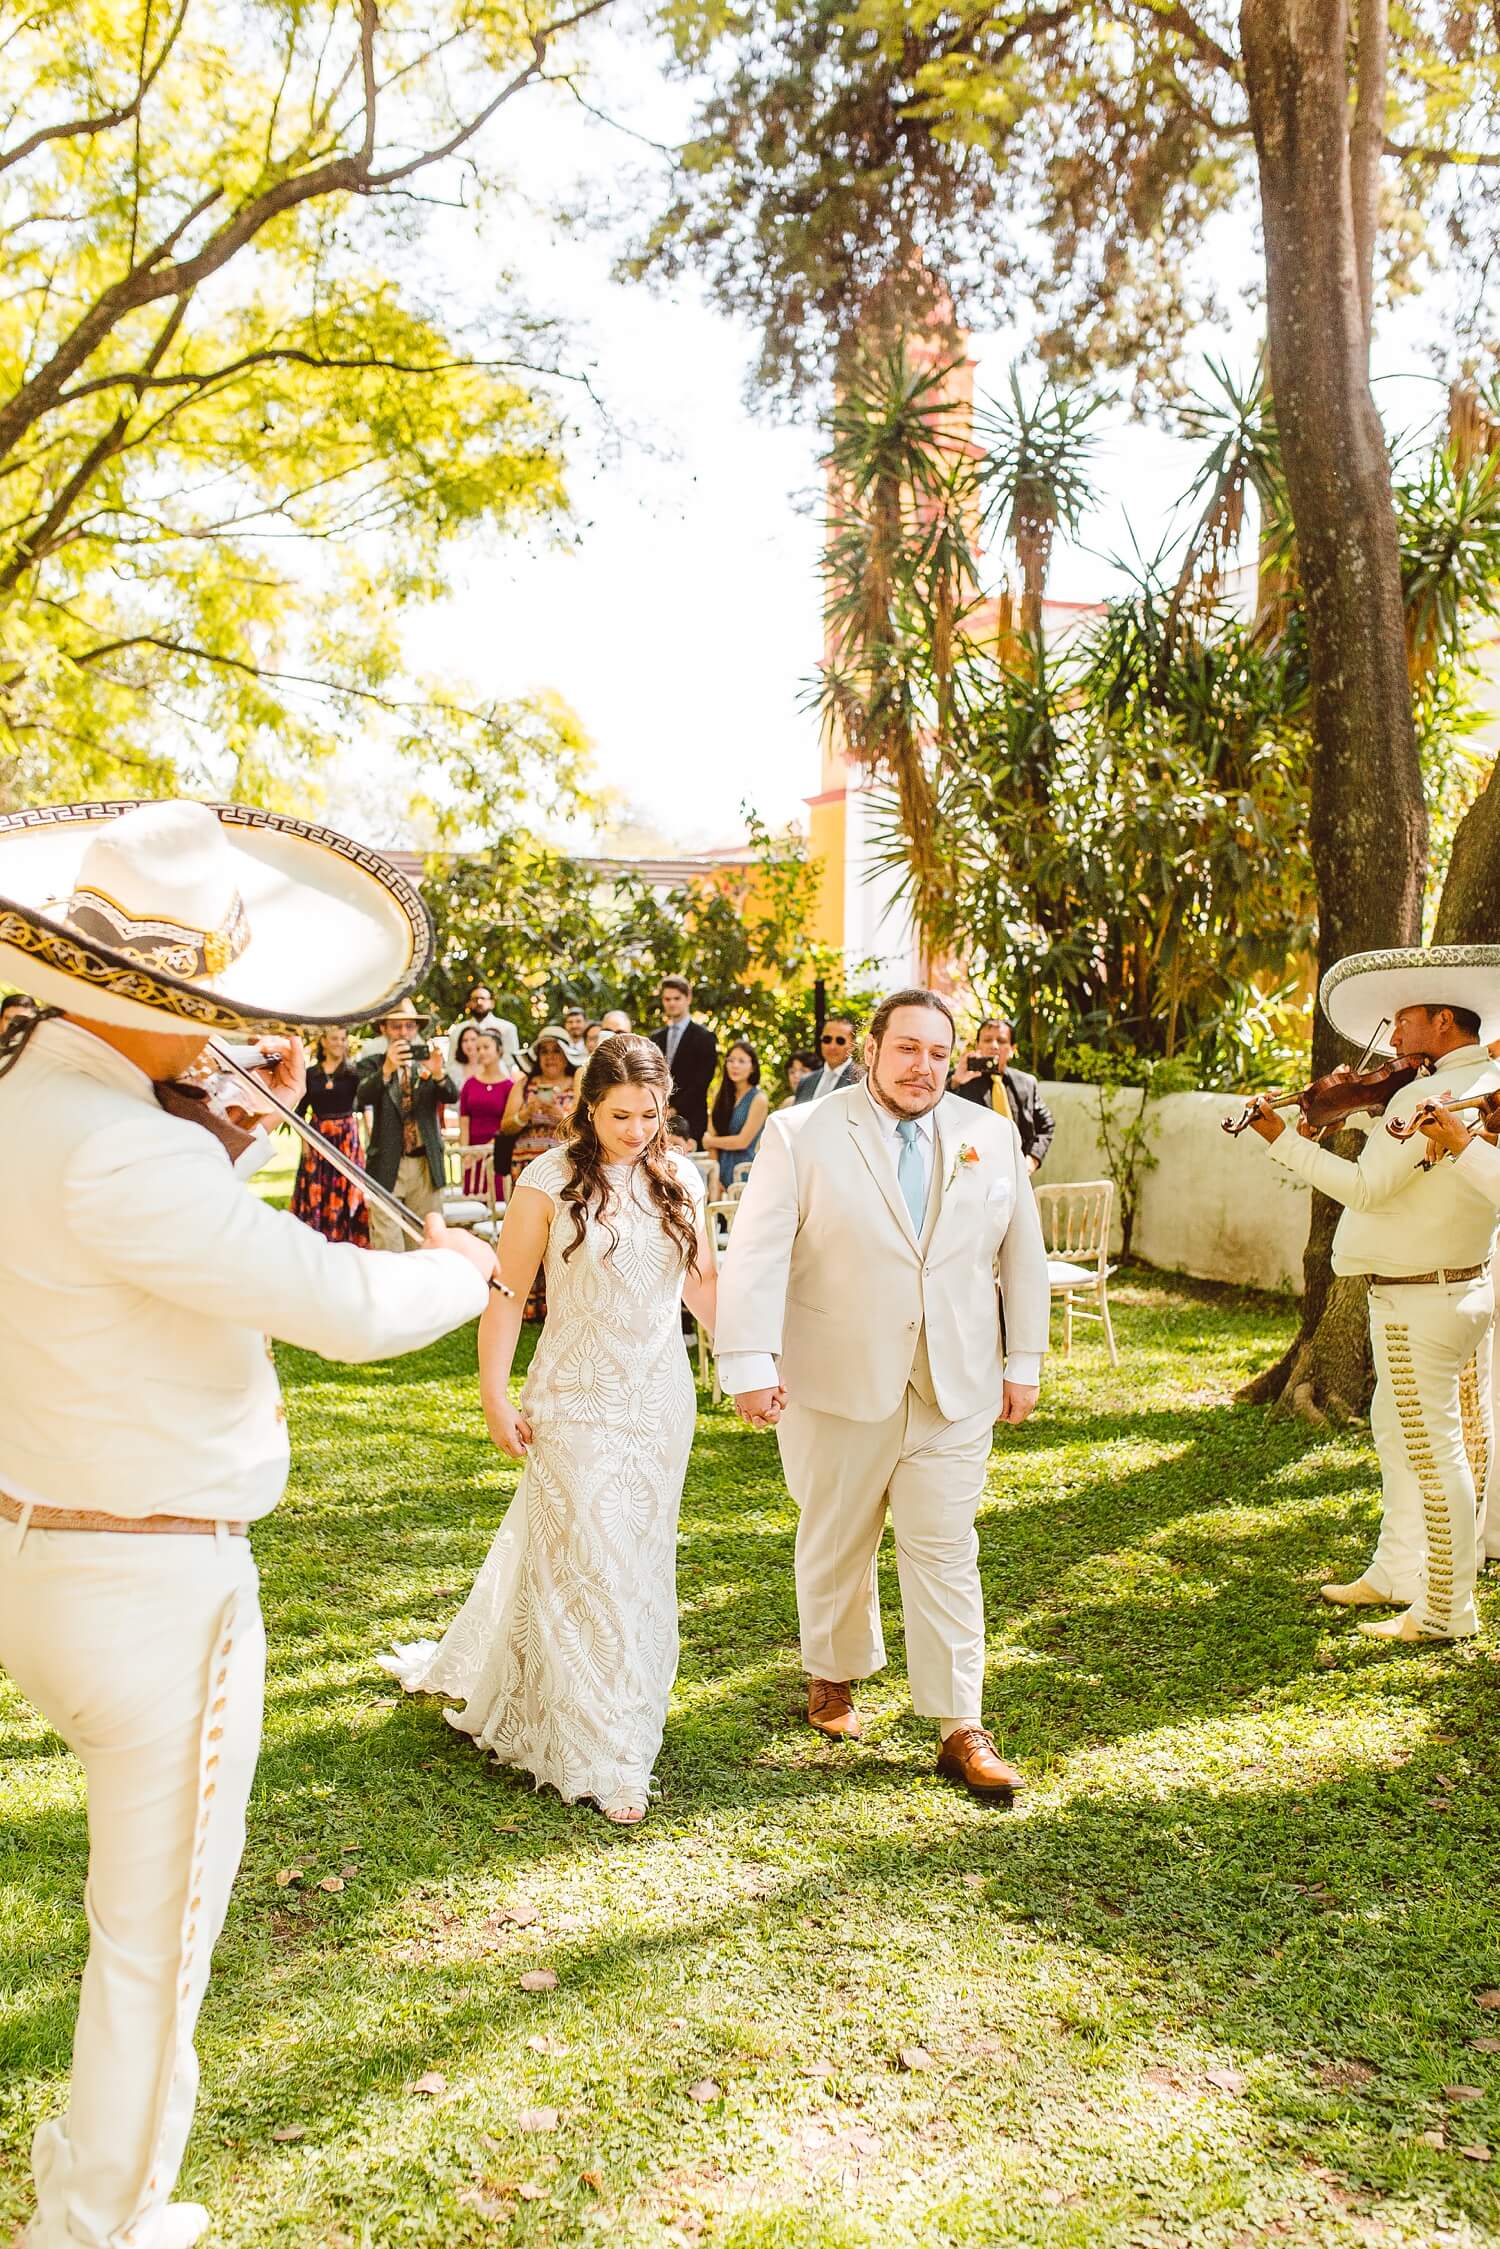 Bride and groom exiting ceremony to mariachi band | Brooke Michelle Photo